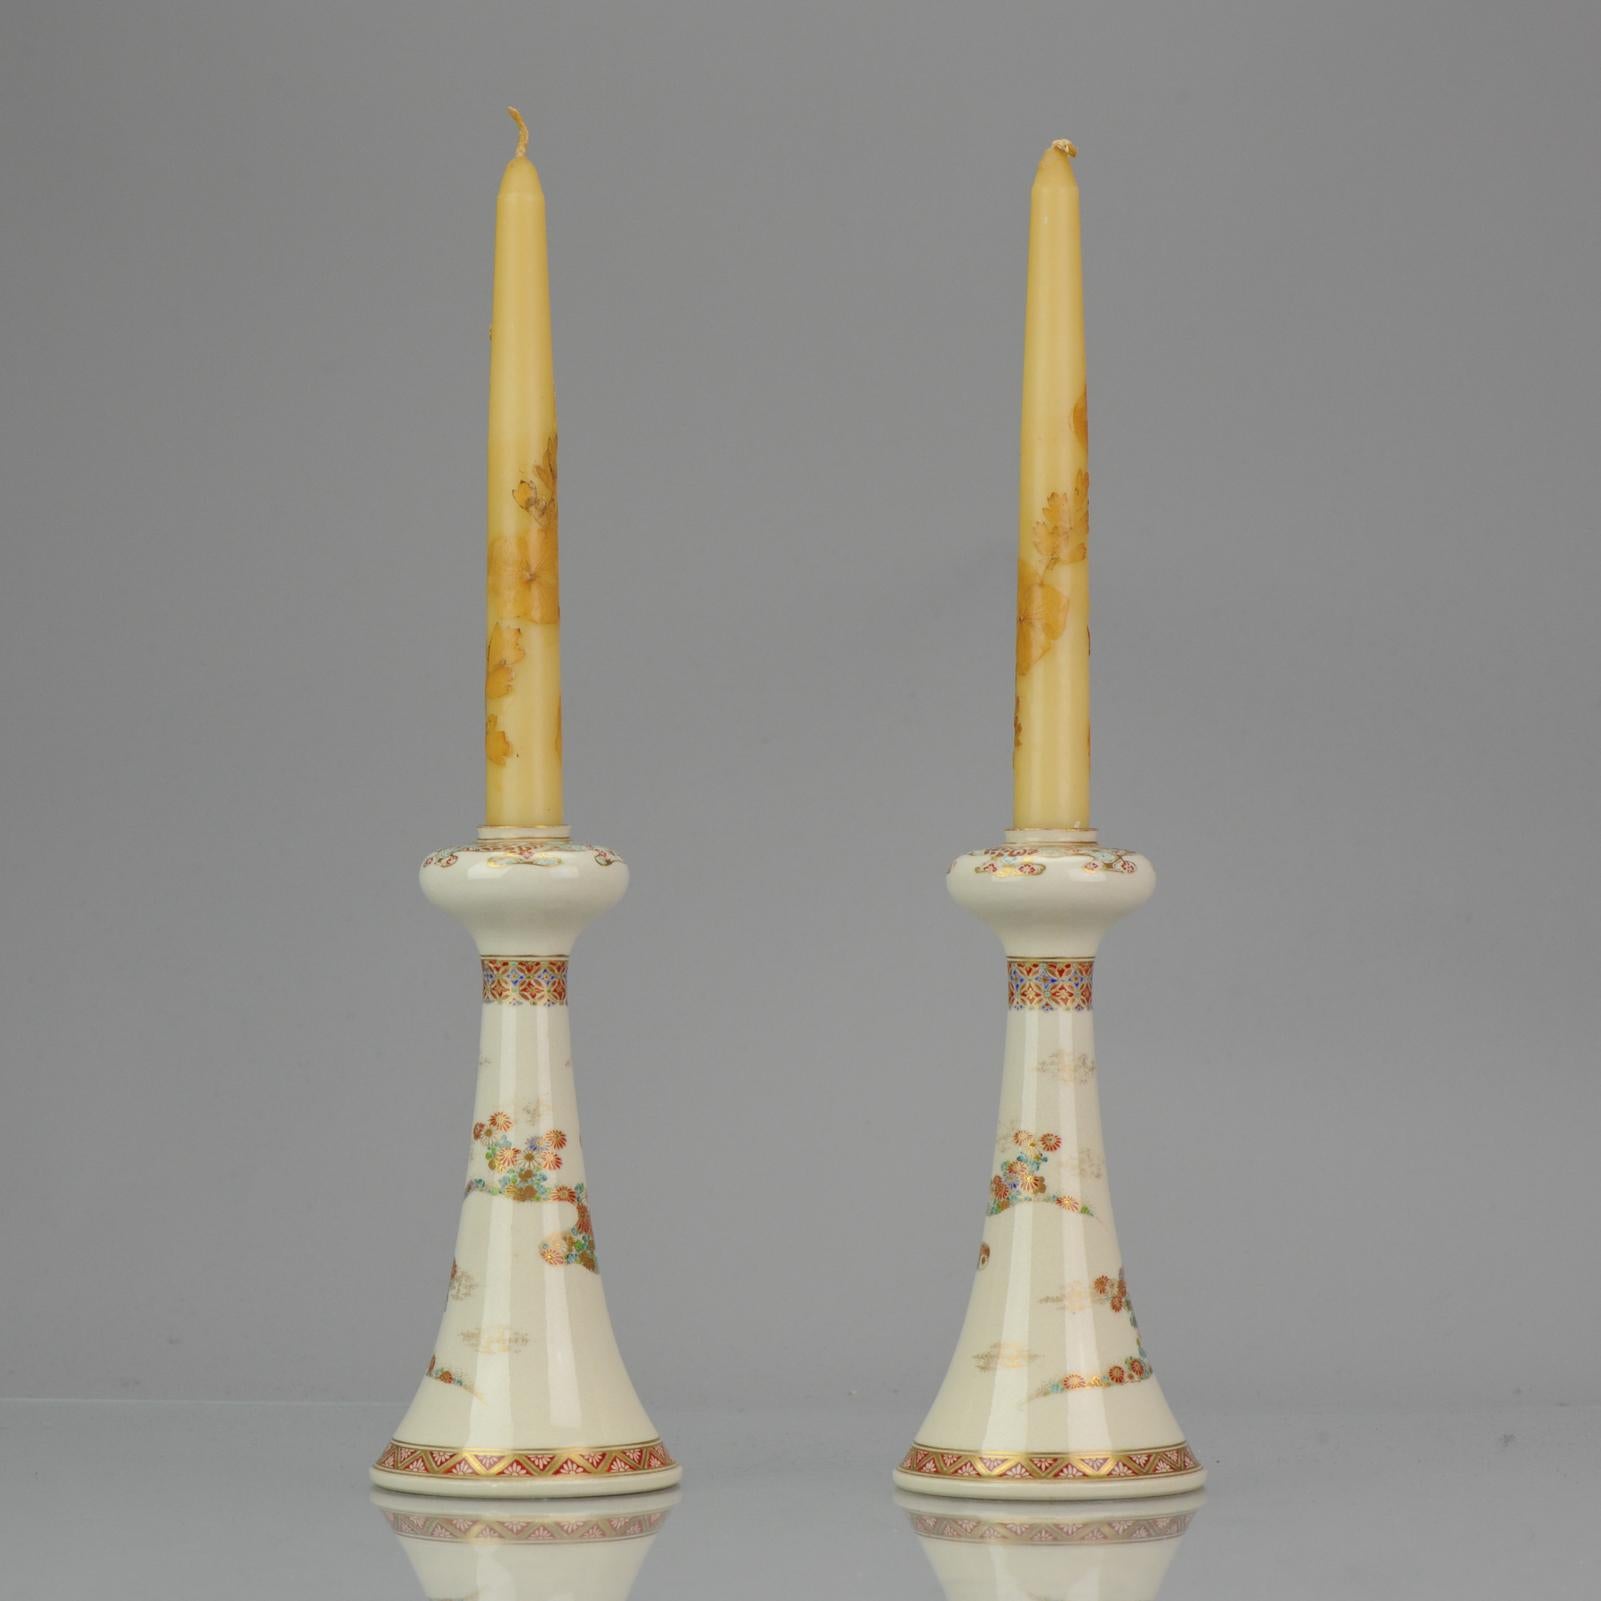 Description
Sharing with you is this nice pair of Japanese Satsuma candle holders, Obiyama, Meiji/Taisho period. Absolute top quality pieces.
With bulbous garlic head tops above tapering bases, sparsely decorated with flowers and foliage, together